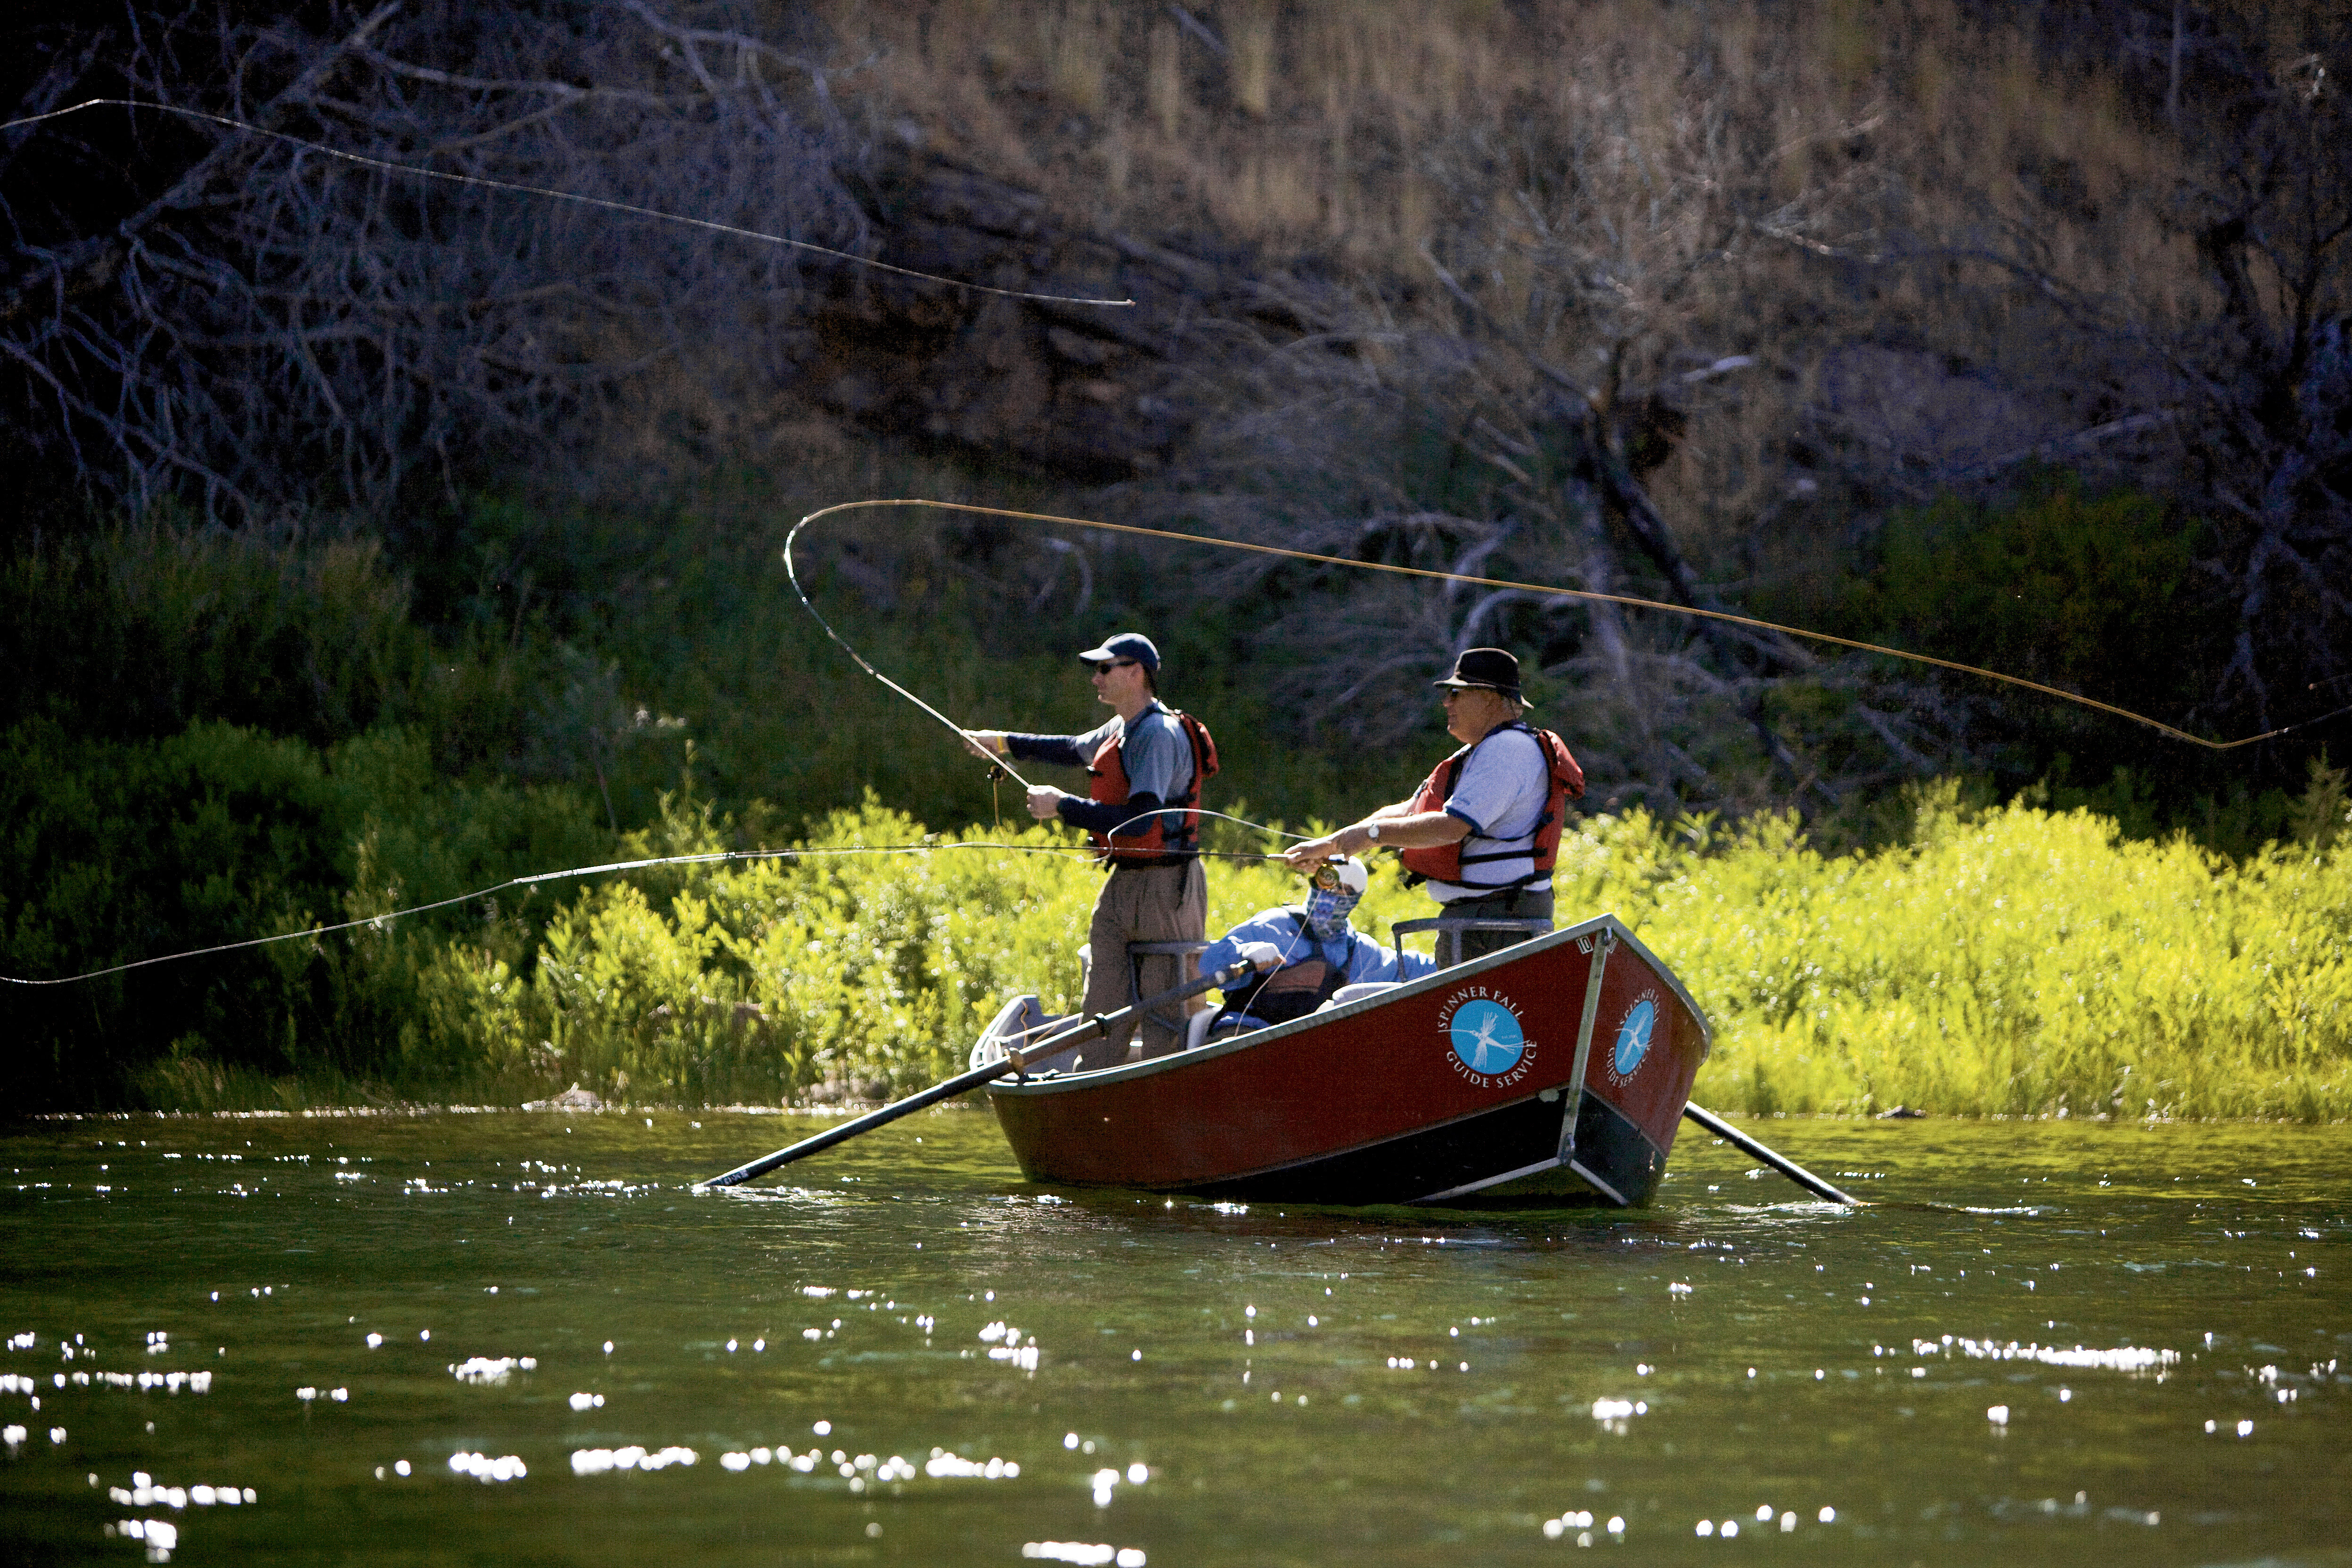 Green River Fishing Report: A Fly Fishing Guide to the Green Less